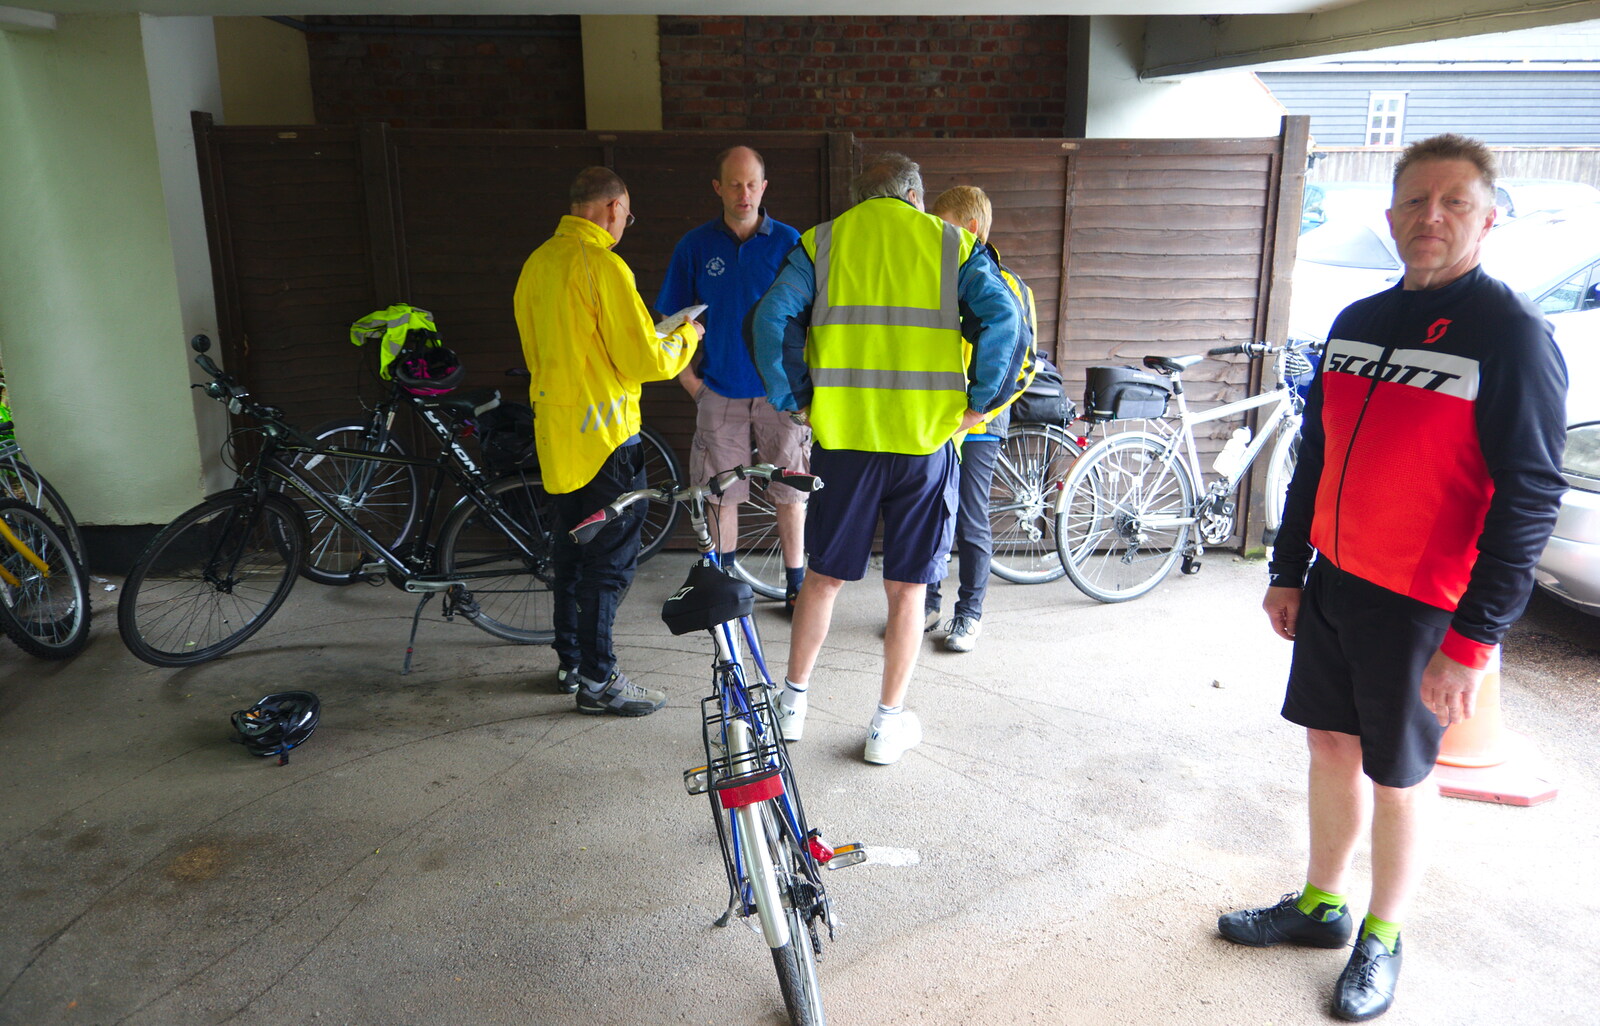 We get ready for the actual bike ride from The BSCC Bike Ride 2019, Coggeshall, Essex - 11th May 2019